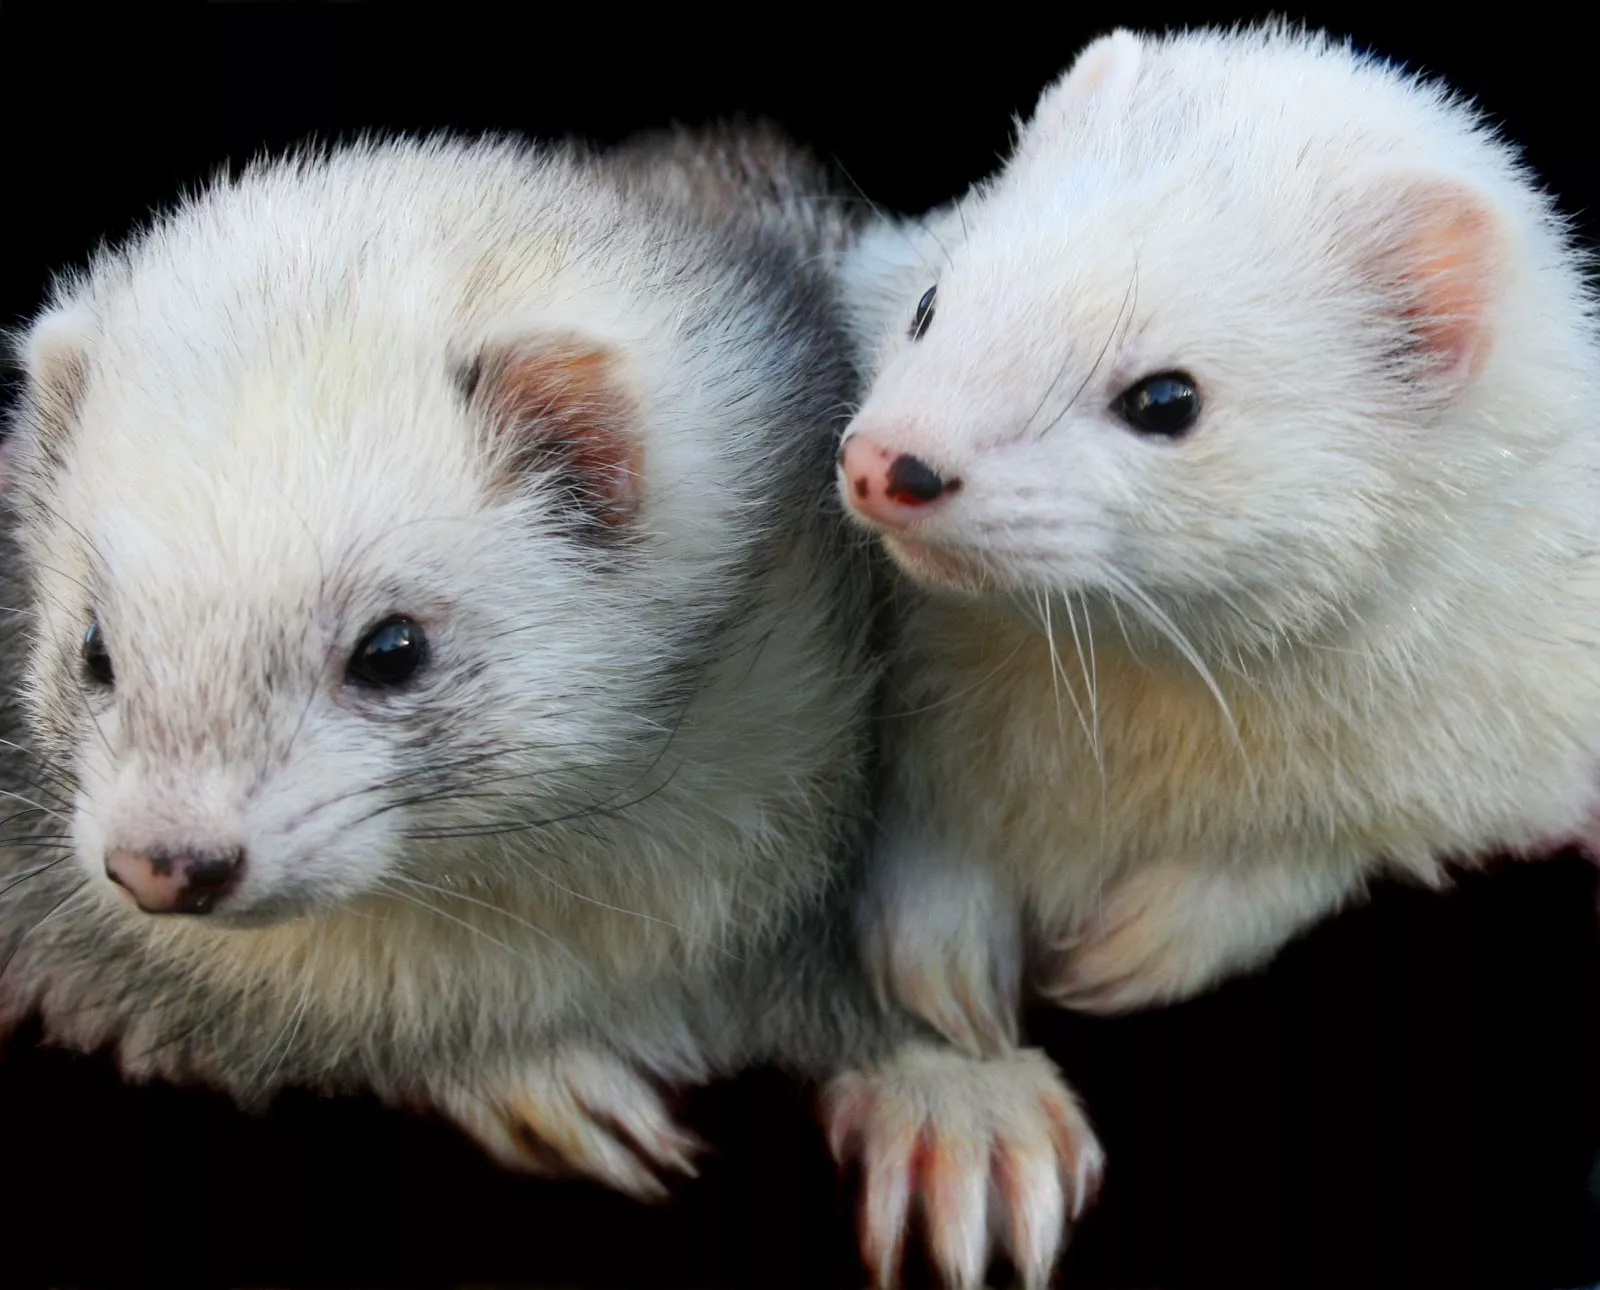 Two white ferrets with black eyes cuddle up to each other against a black background. 